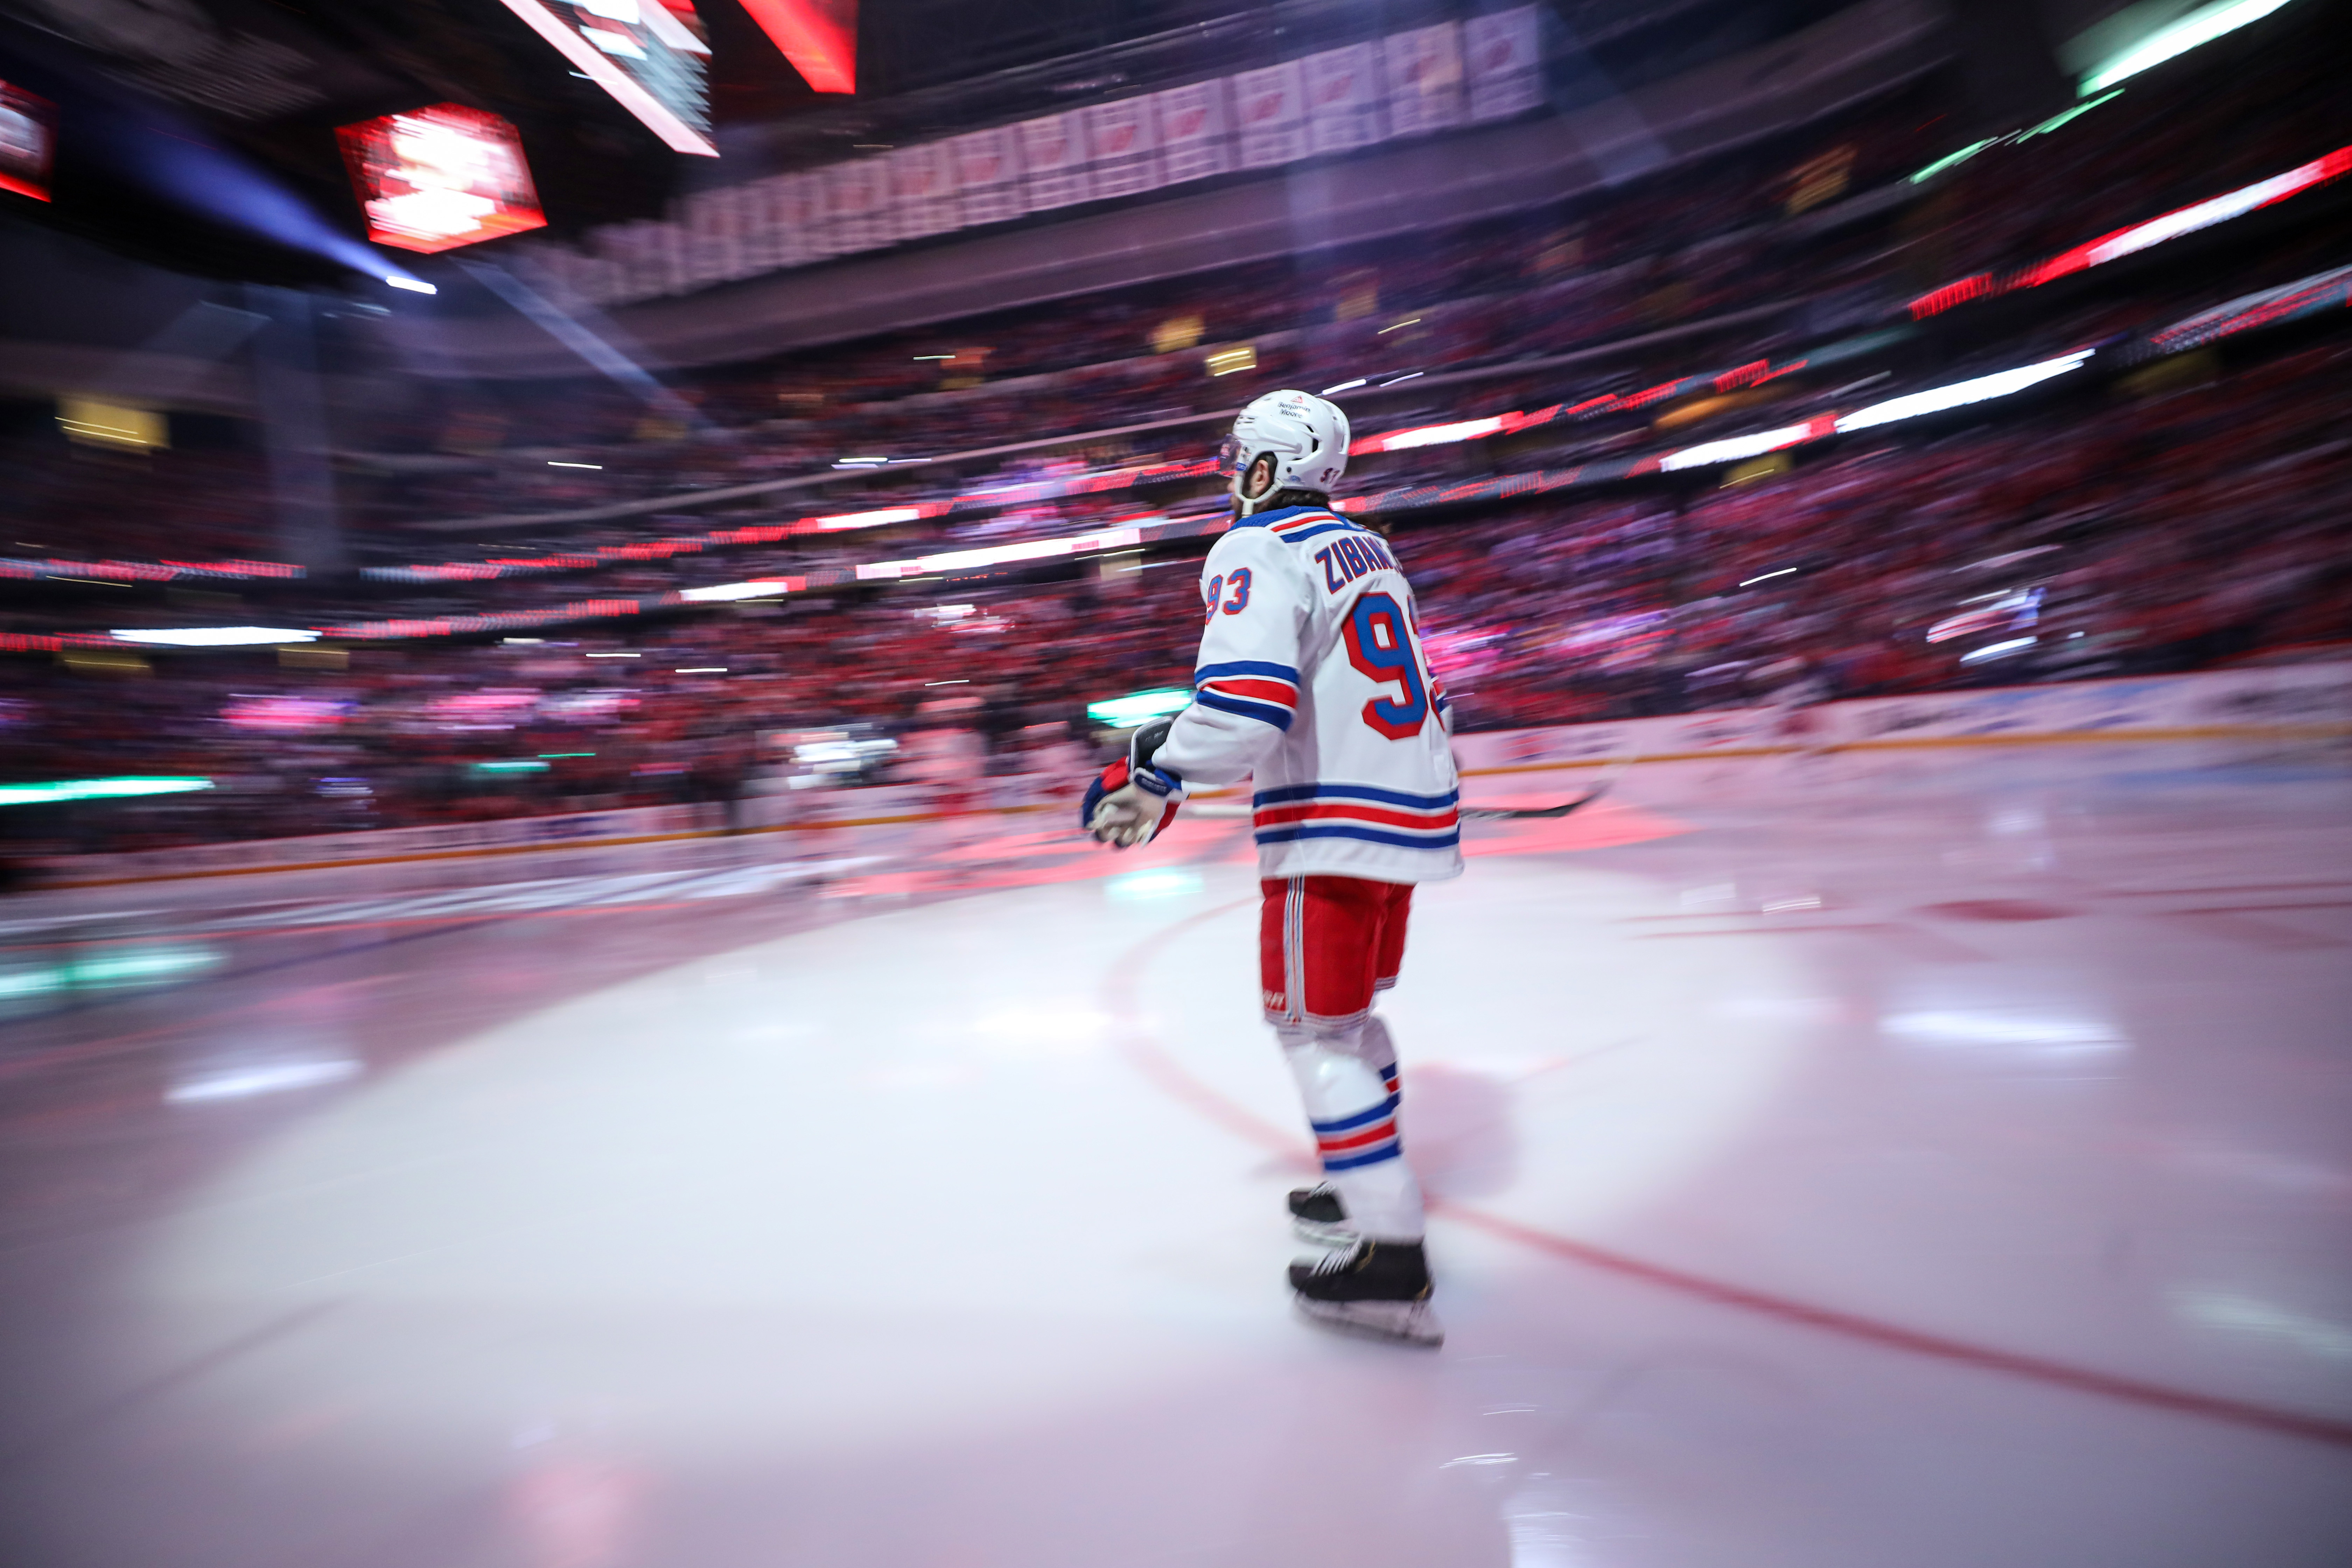 New York Rangers center Mika Zibanejad (93) skates onto the ice to face the New Jersey Devils in the opening round of the NHL Stanley Cup playoffs on Tuesday, April 18, 2023 in Newark, N.J. The Rangers won, 5-1.